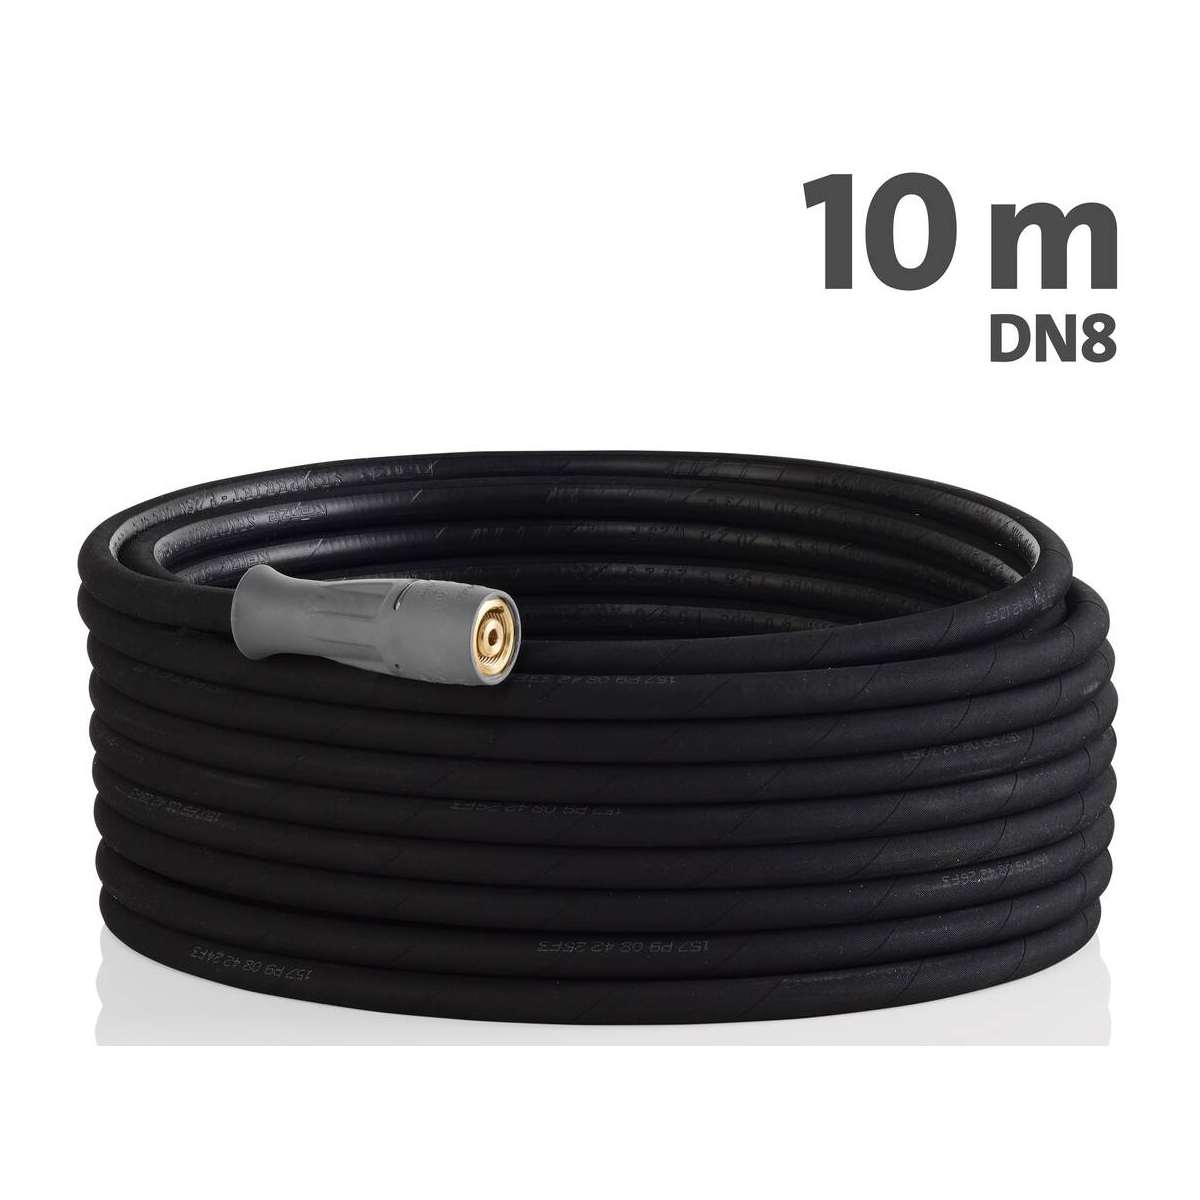 41081 - High Pressure Hose 10m - Double Wire